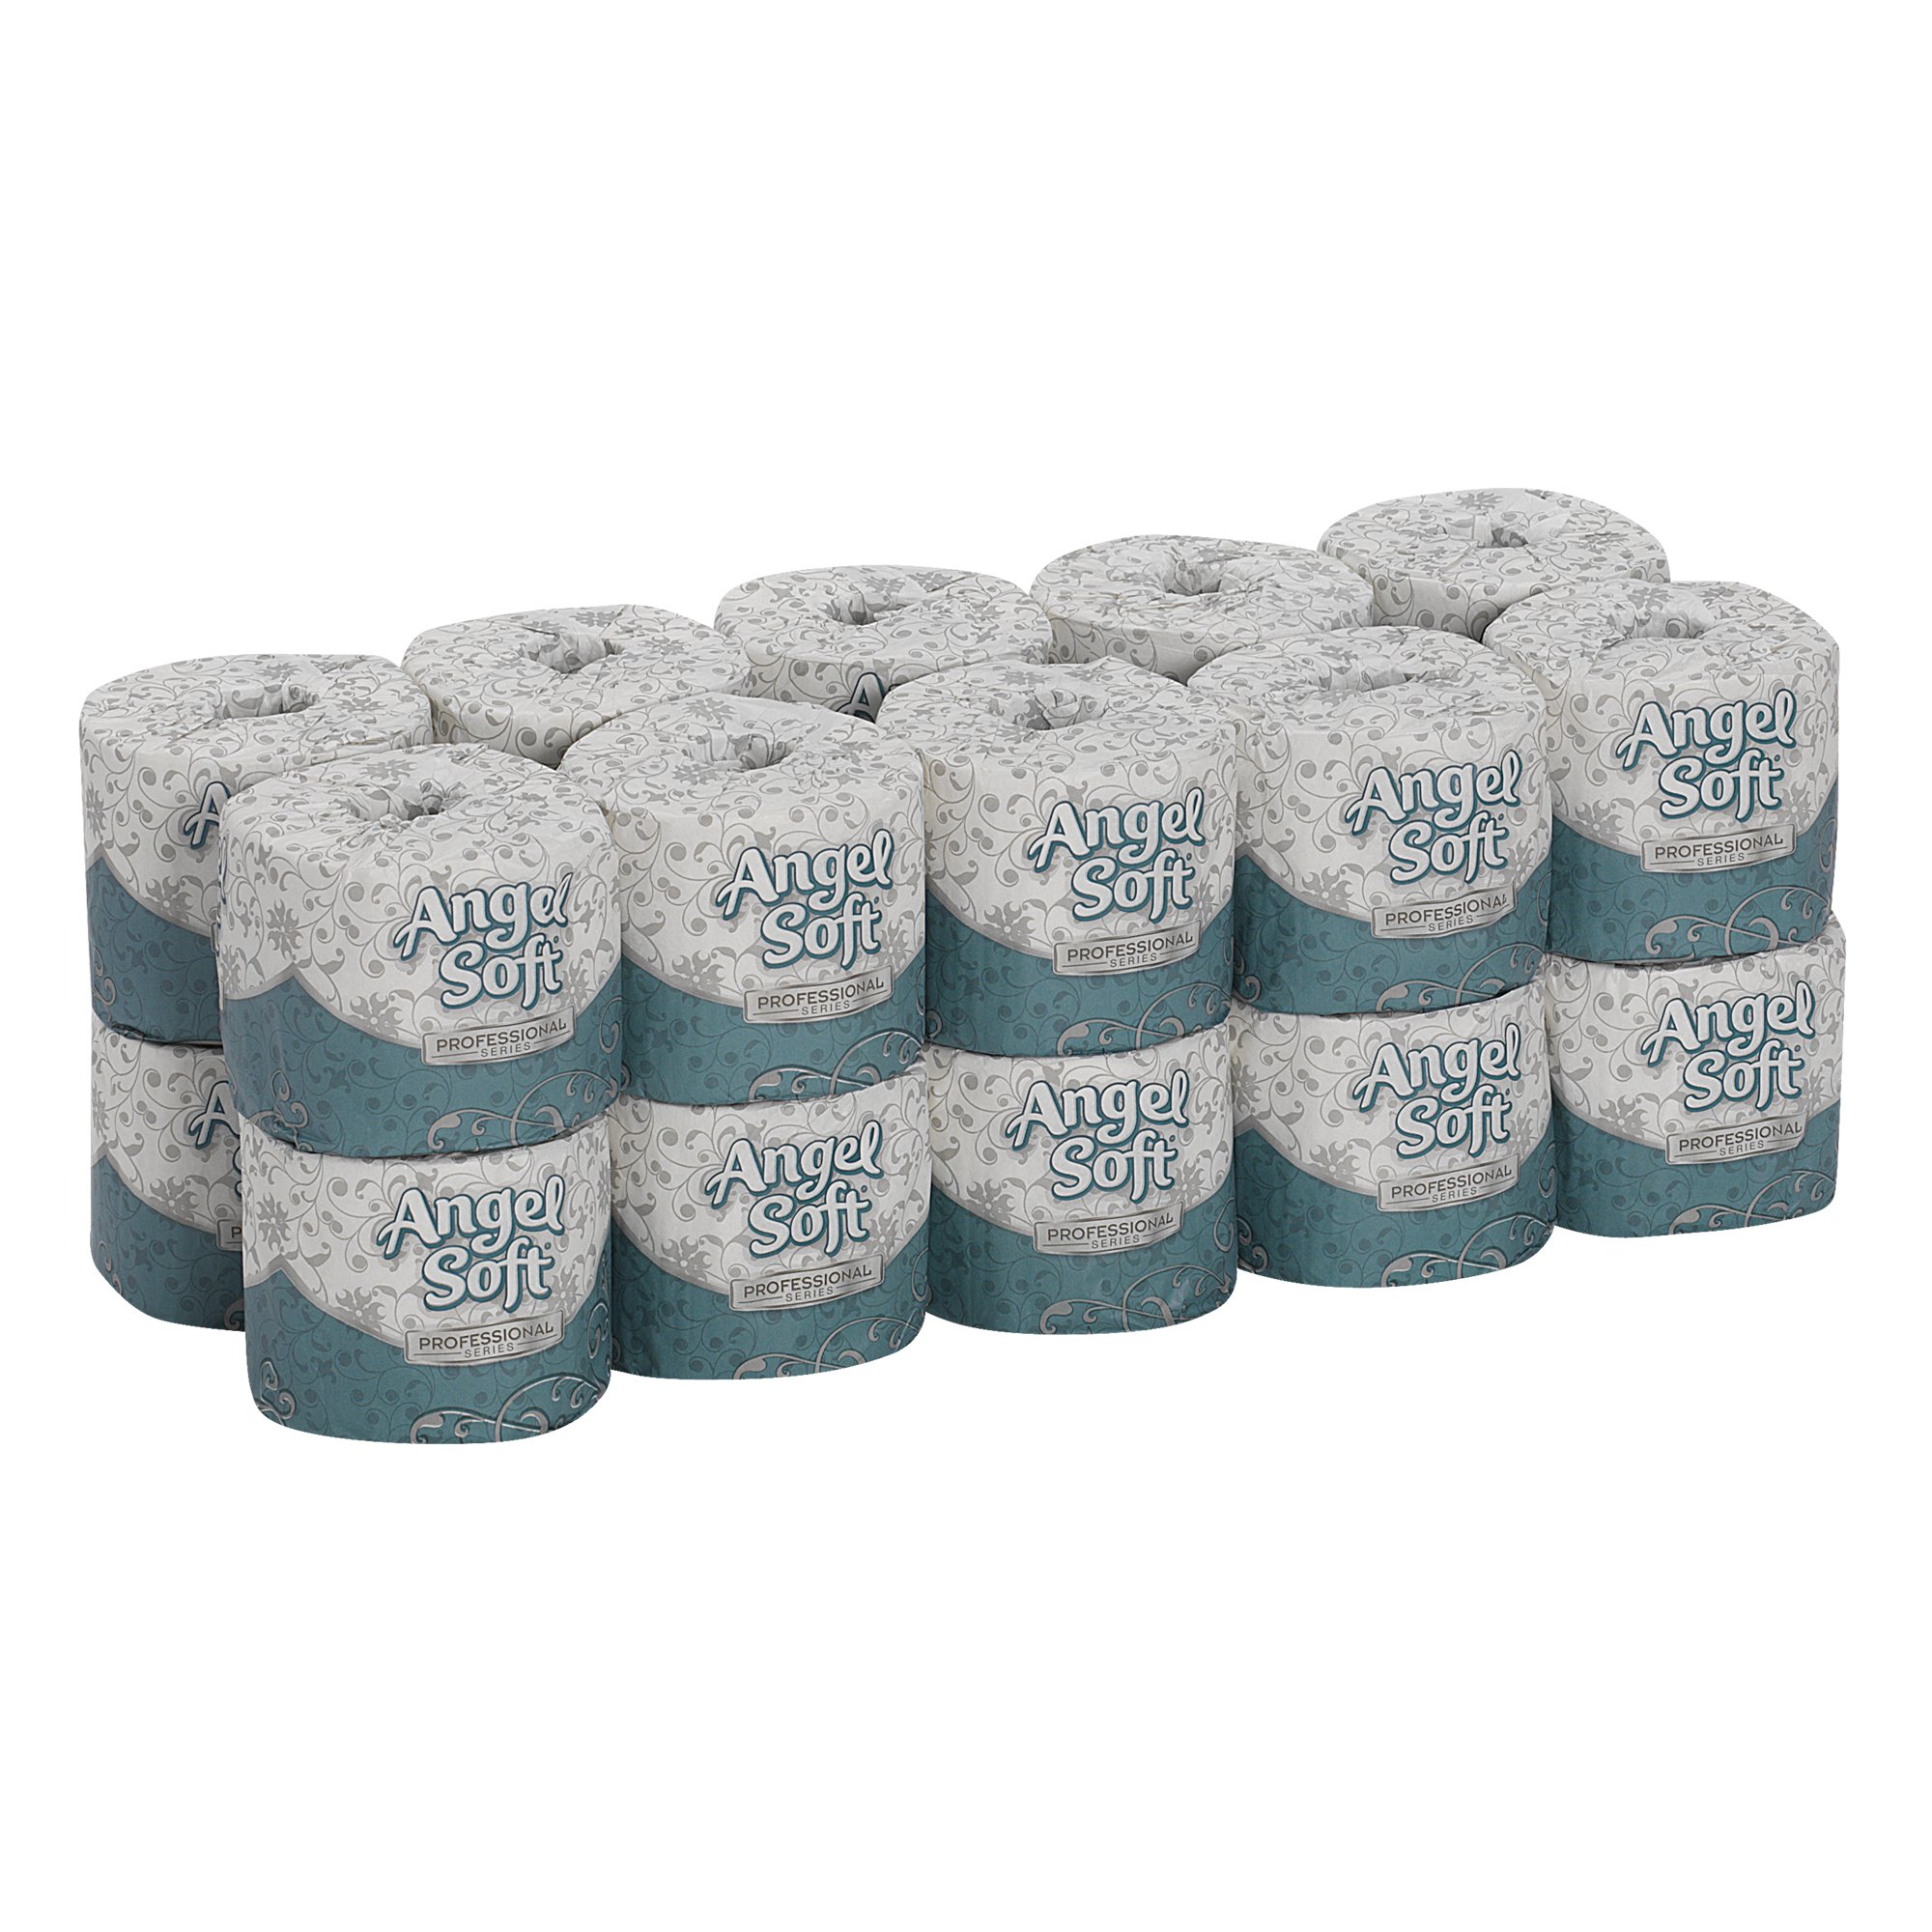 Angel Soft Ultra Professional Series 2-Ply Embossed Toilet Paper by GP PRO 1632014 400 Sheets Per Roll 20 Rolls Per Convenience Case